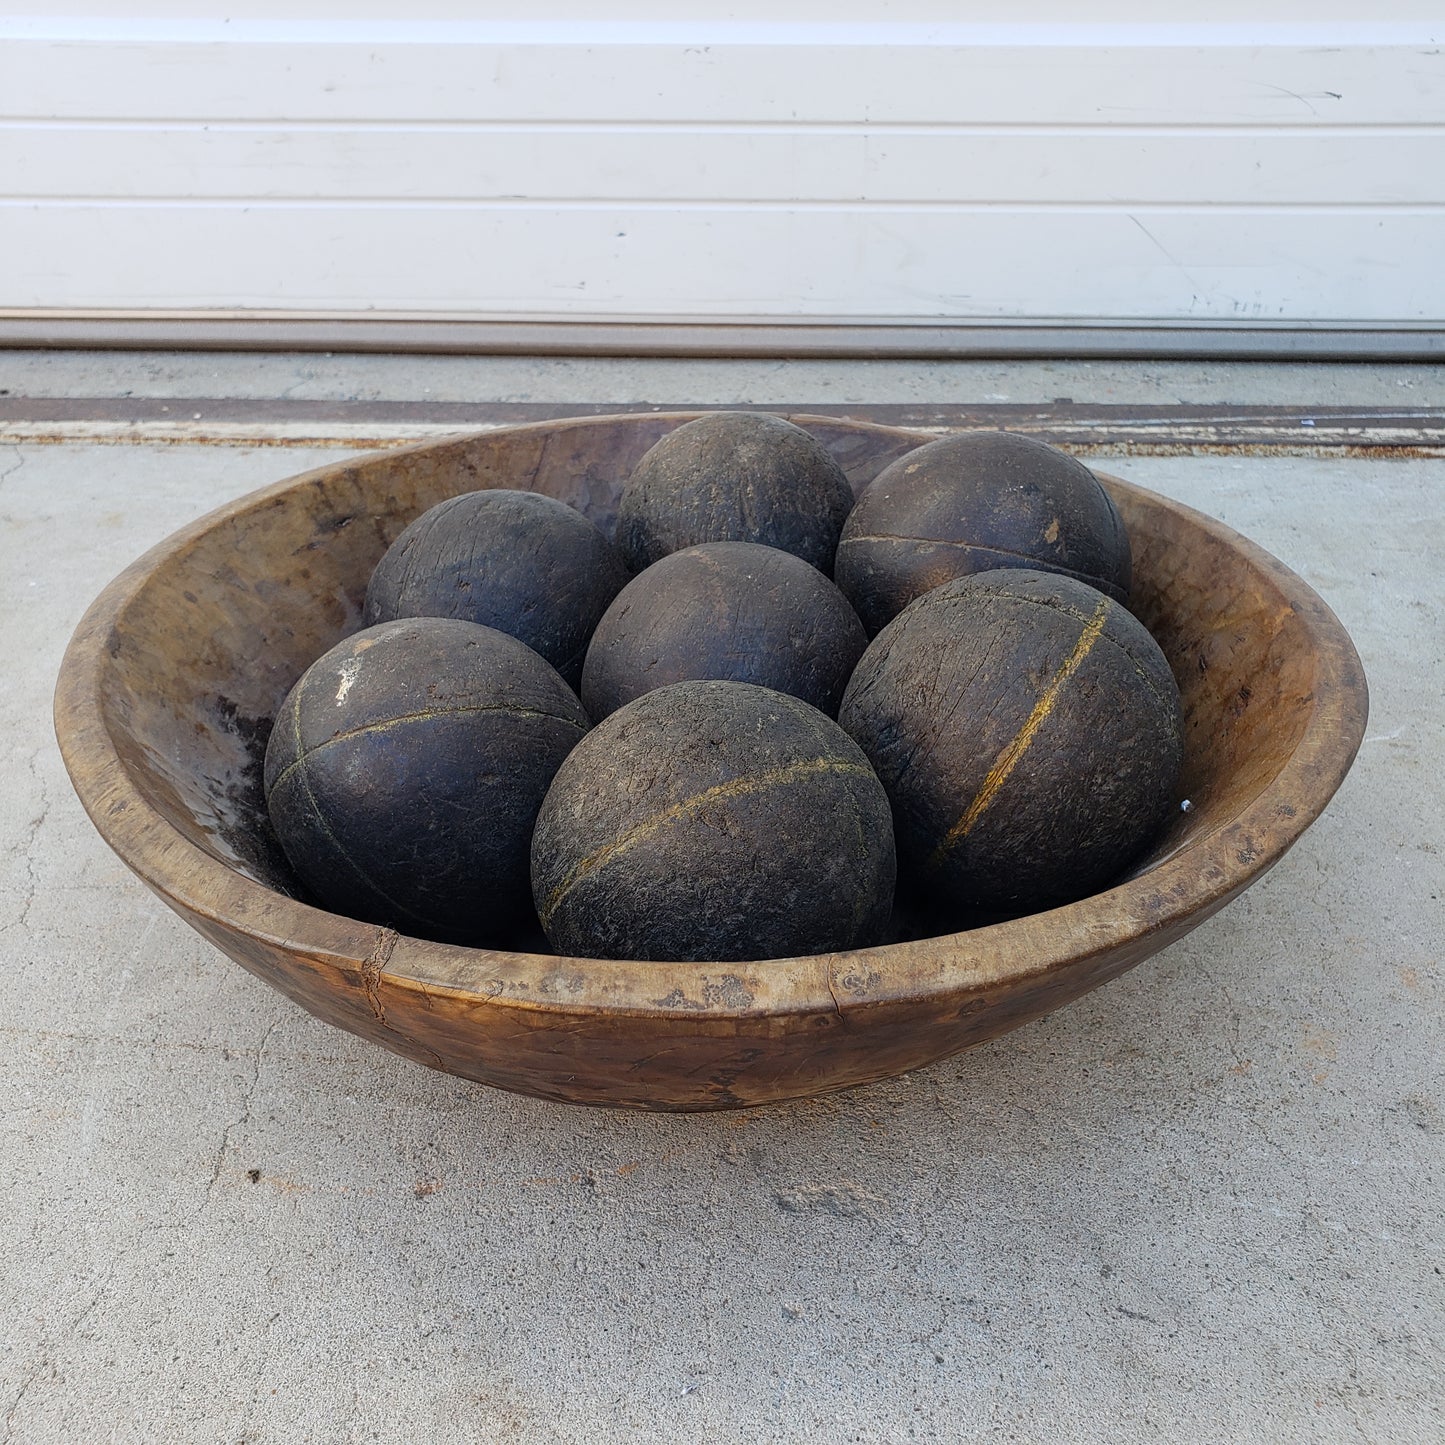 Wooden Bowl with Seven Wooden Balls